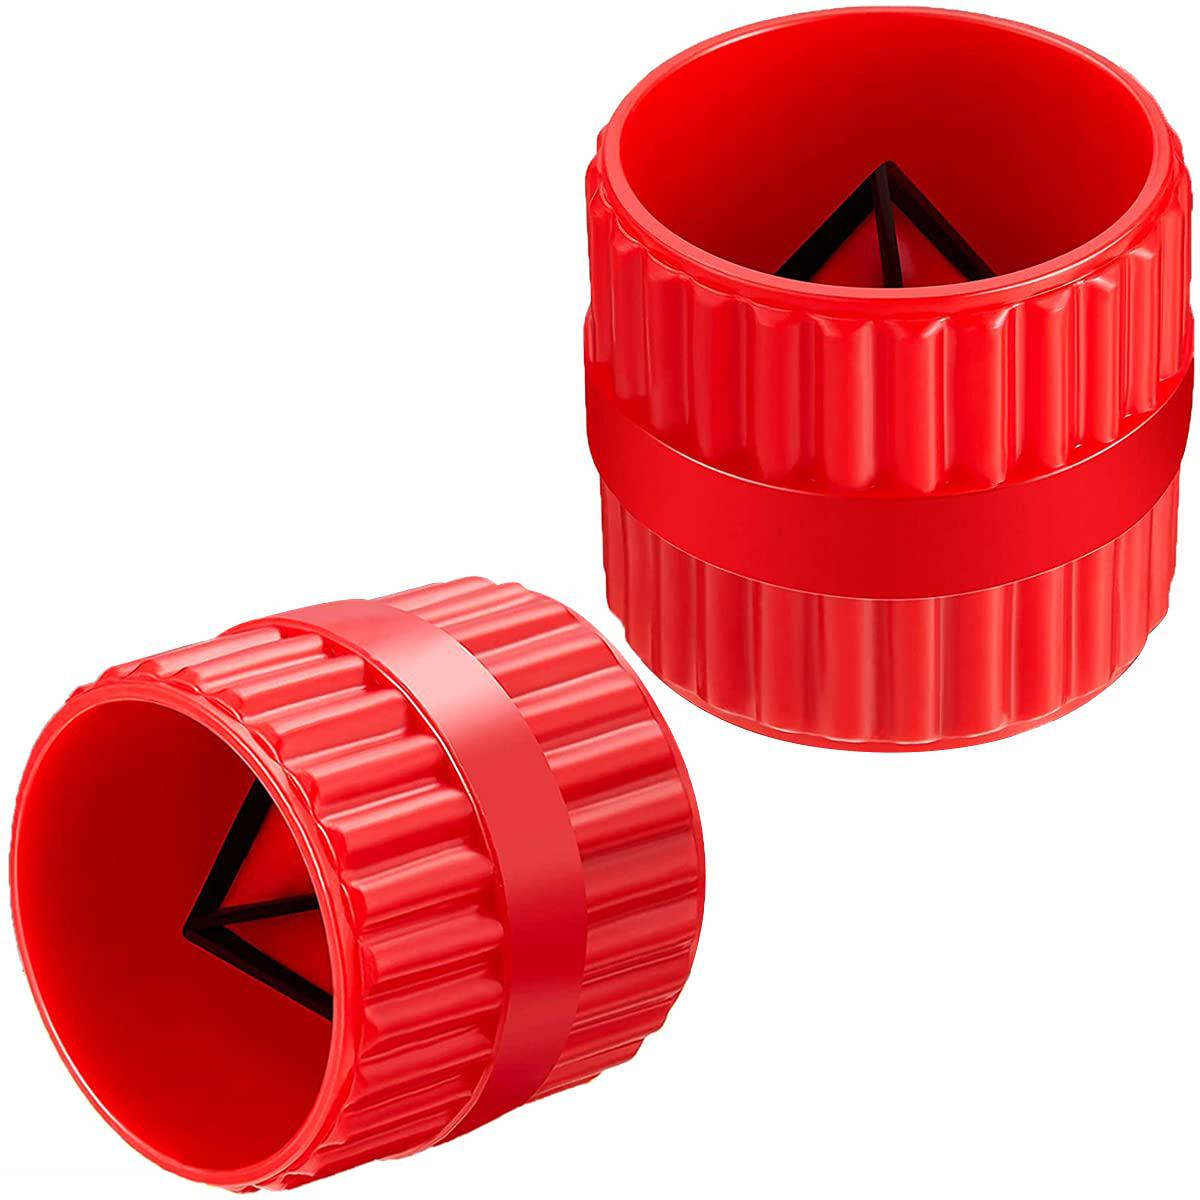 YRMJ 2 pieces red inner-outer reamer pipe and tube deburring reamer tubing chamfer tool for pvc/ppr/copper/brass/aluminum tubes(3/